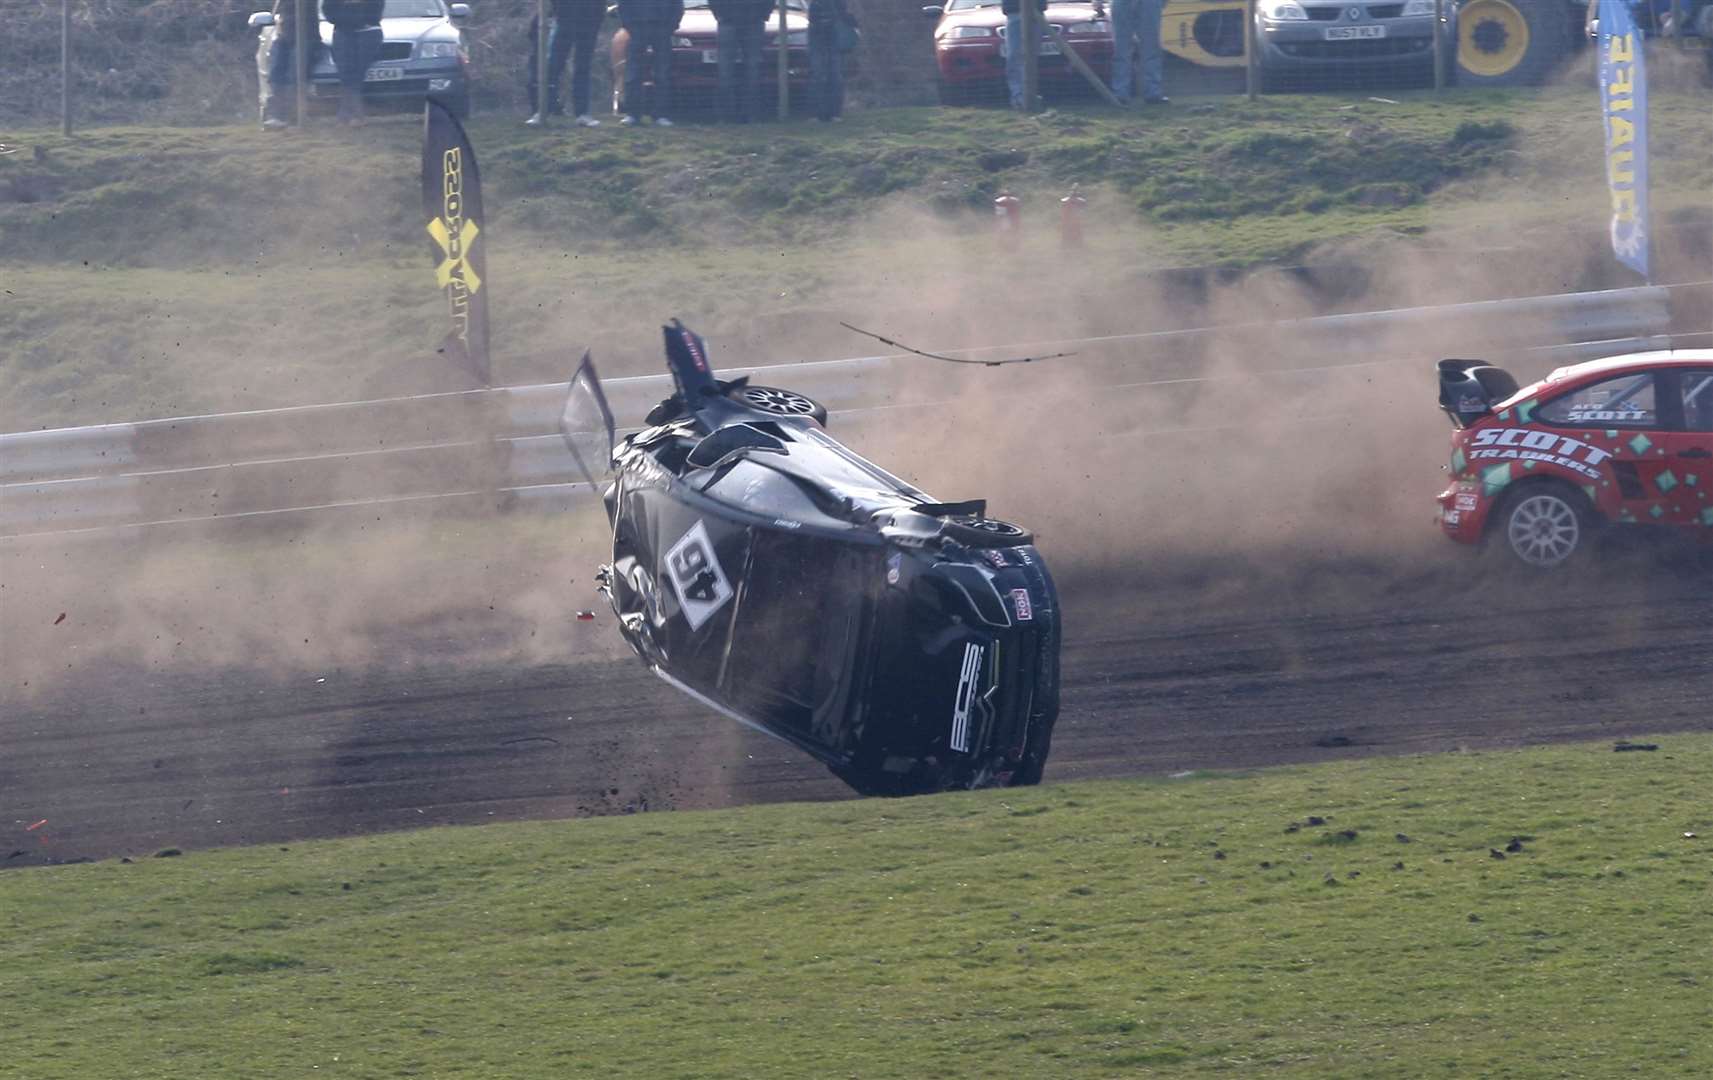 The 2011 season started badly for Doran. Picture: Danny Dzenis, PSP Images